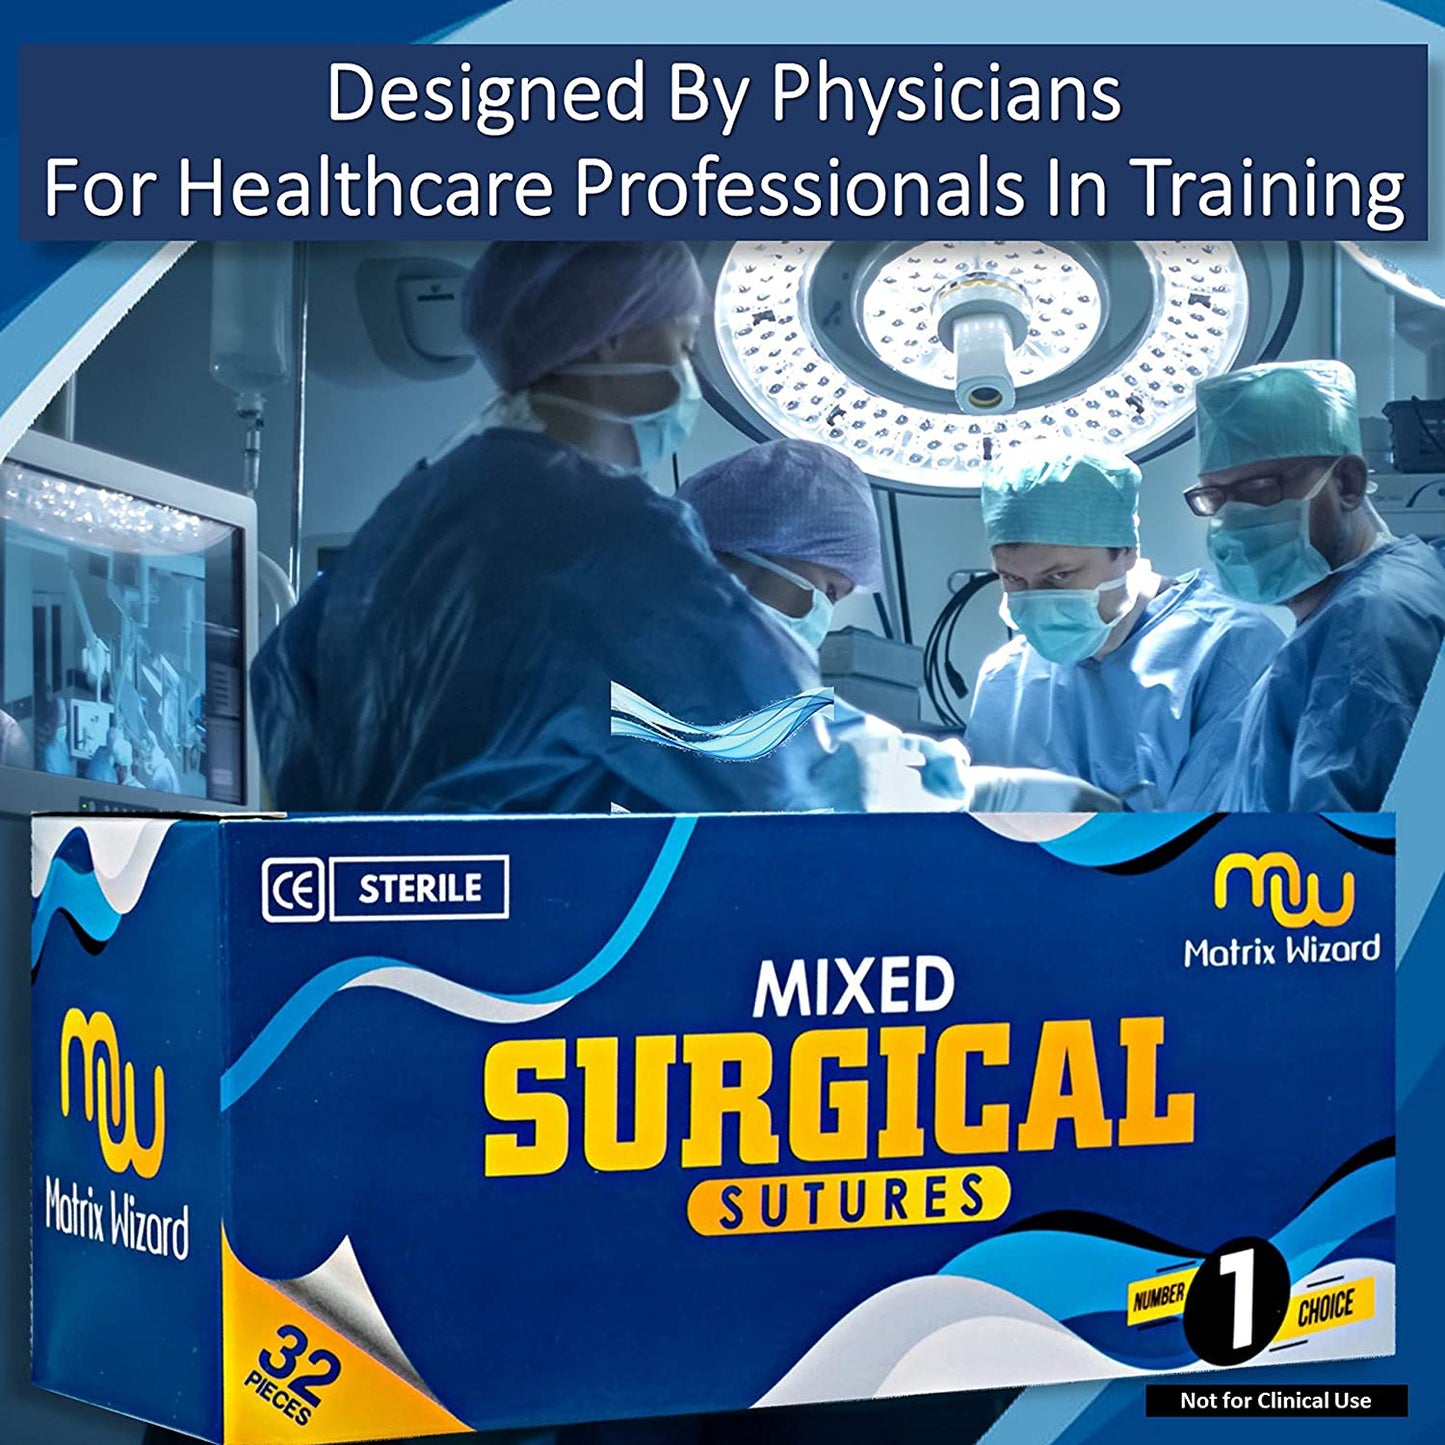 Mixed Sterile Sutures Thread with Needle 32PK (0, 2-0, 3-0, 4-0) Non-Absorbable - Surgical Suture Practice Kit, Medical, Nursing, EMT, PA, Dental, Veterinary Student's Hospital Training Set, Taxidermy